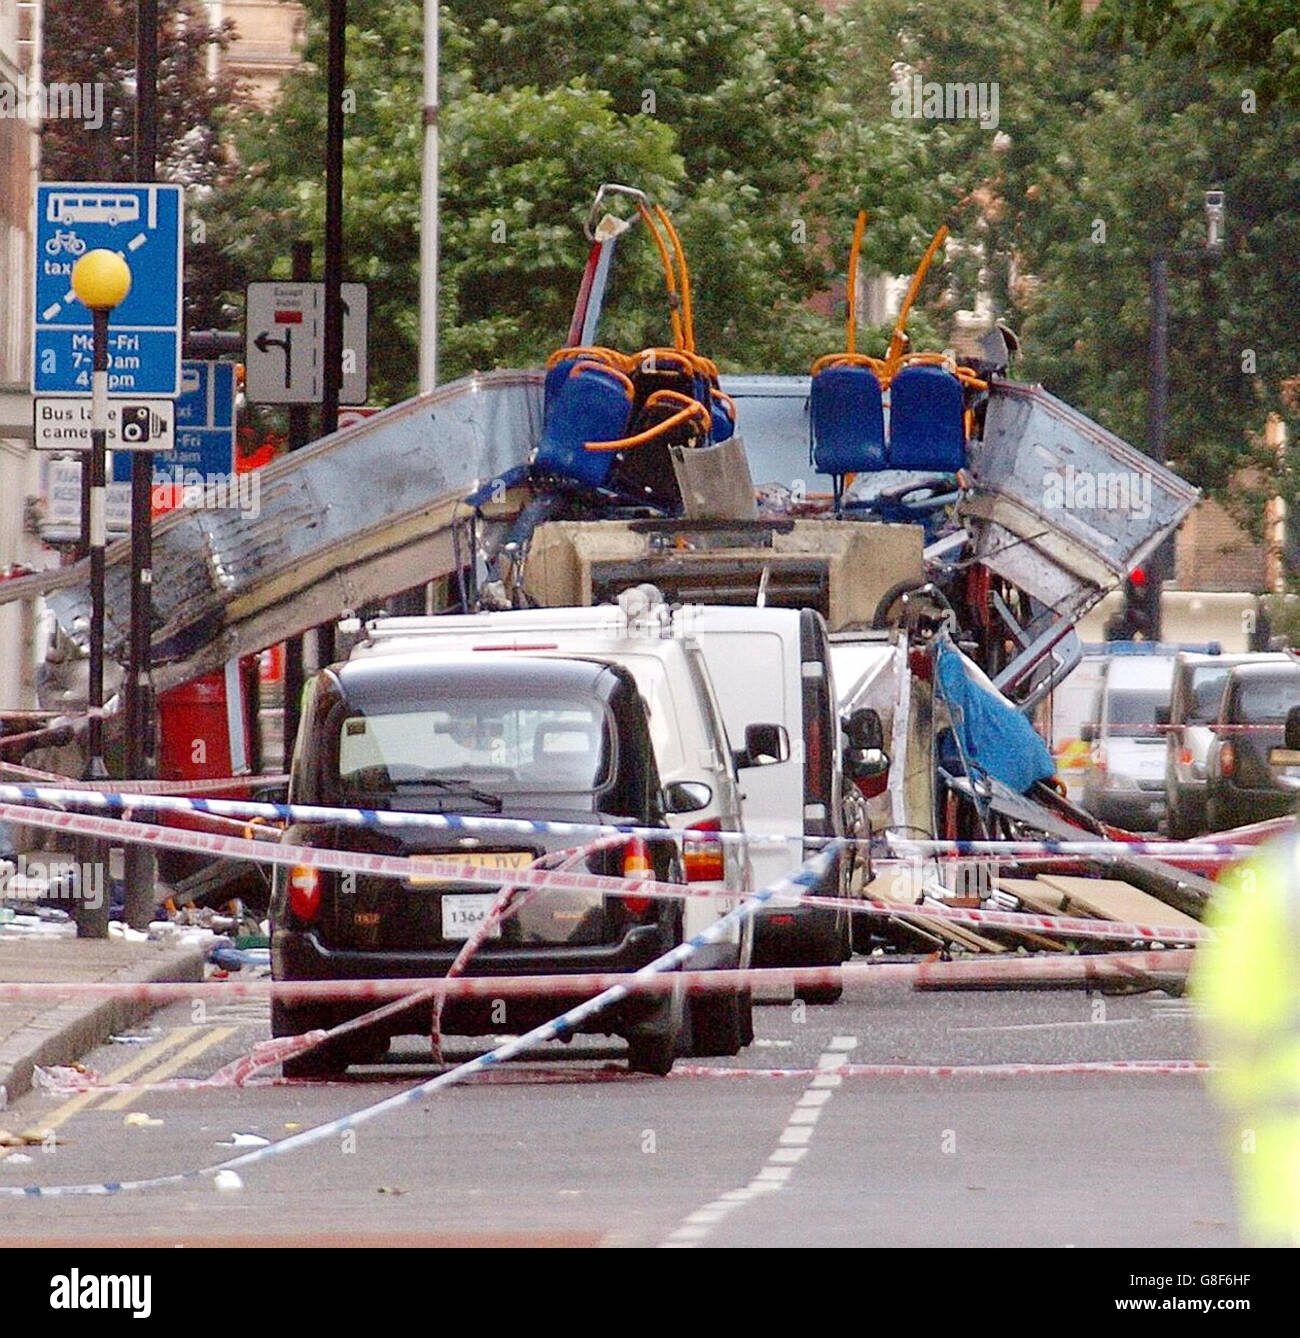 The scene in Tavistock Square, Central London, after a bomb ripped through a double decker bus. Stock Photo